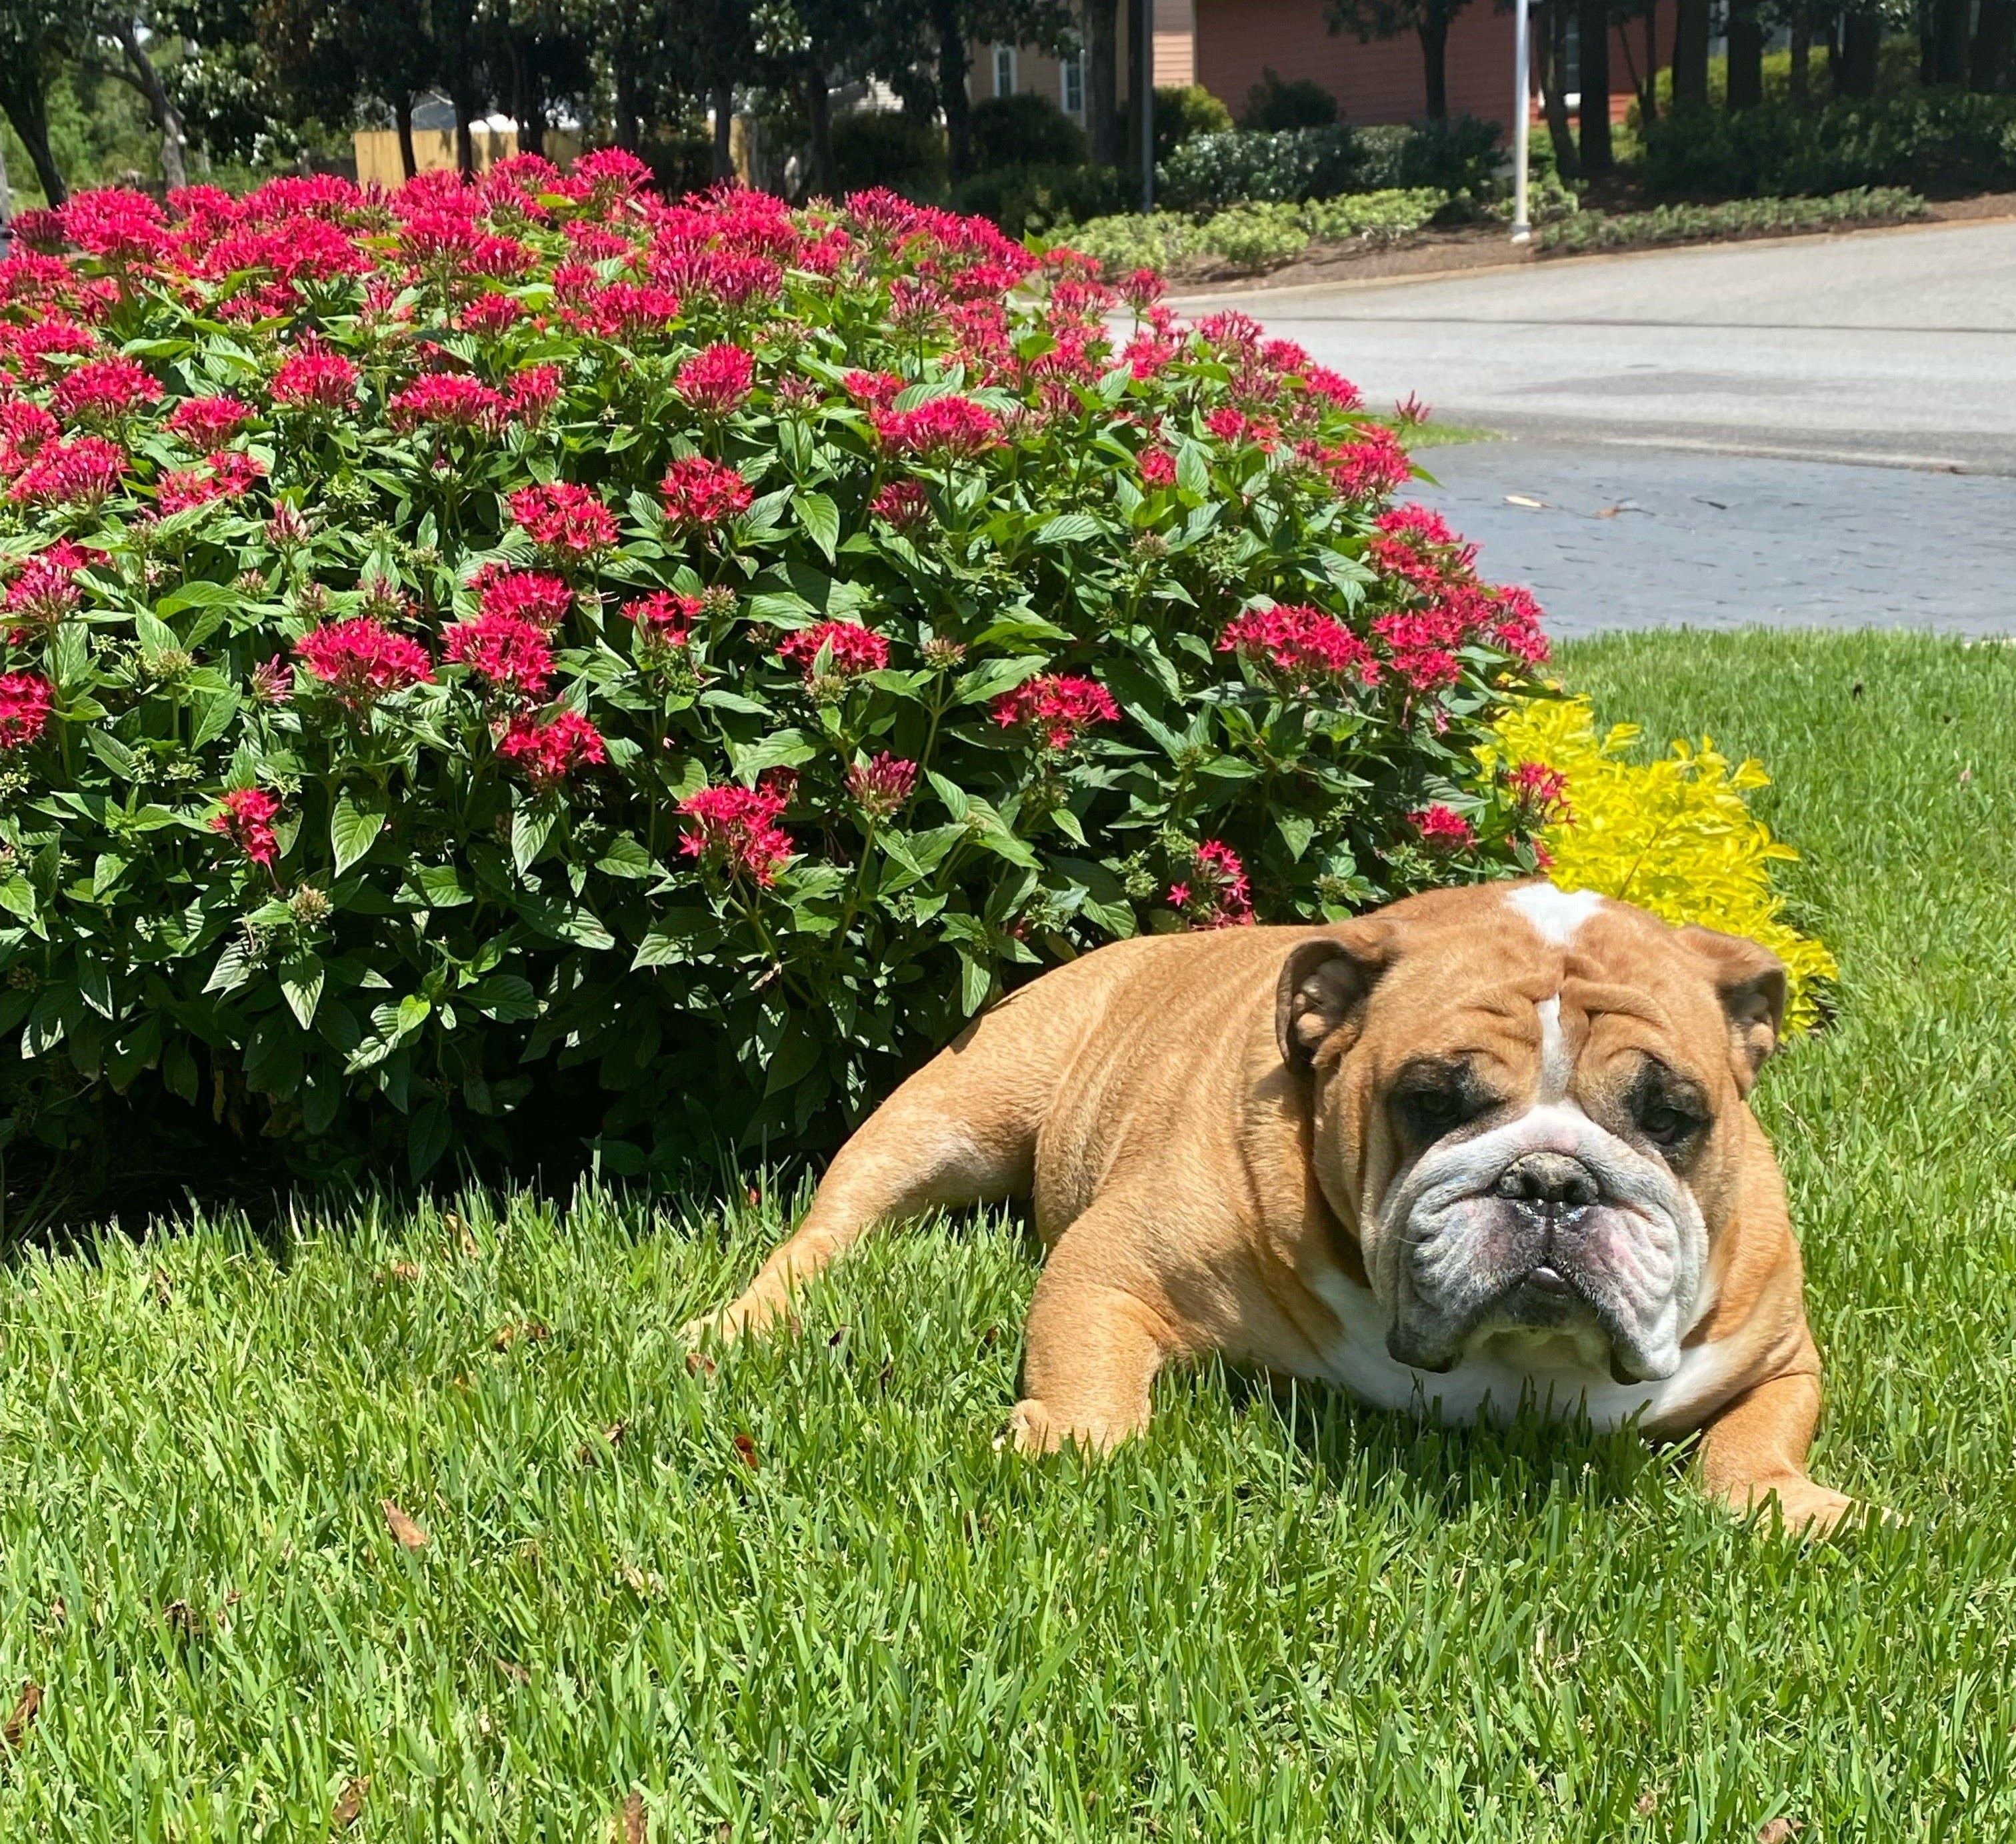 A dog sitting in front of flowers.